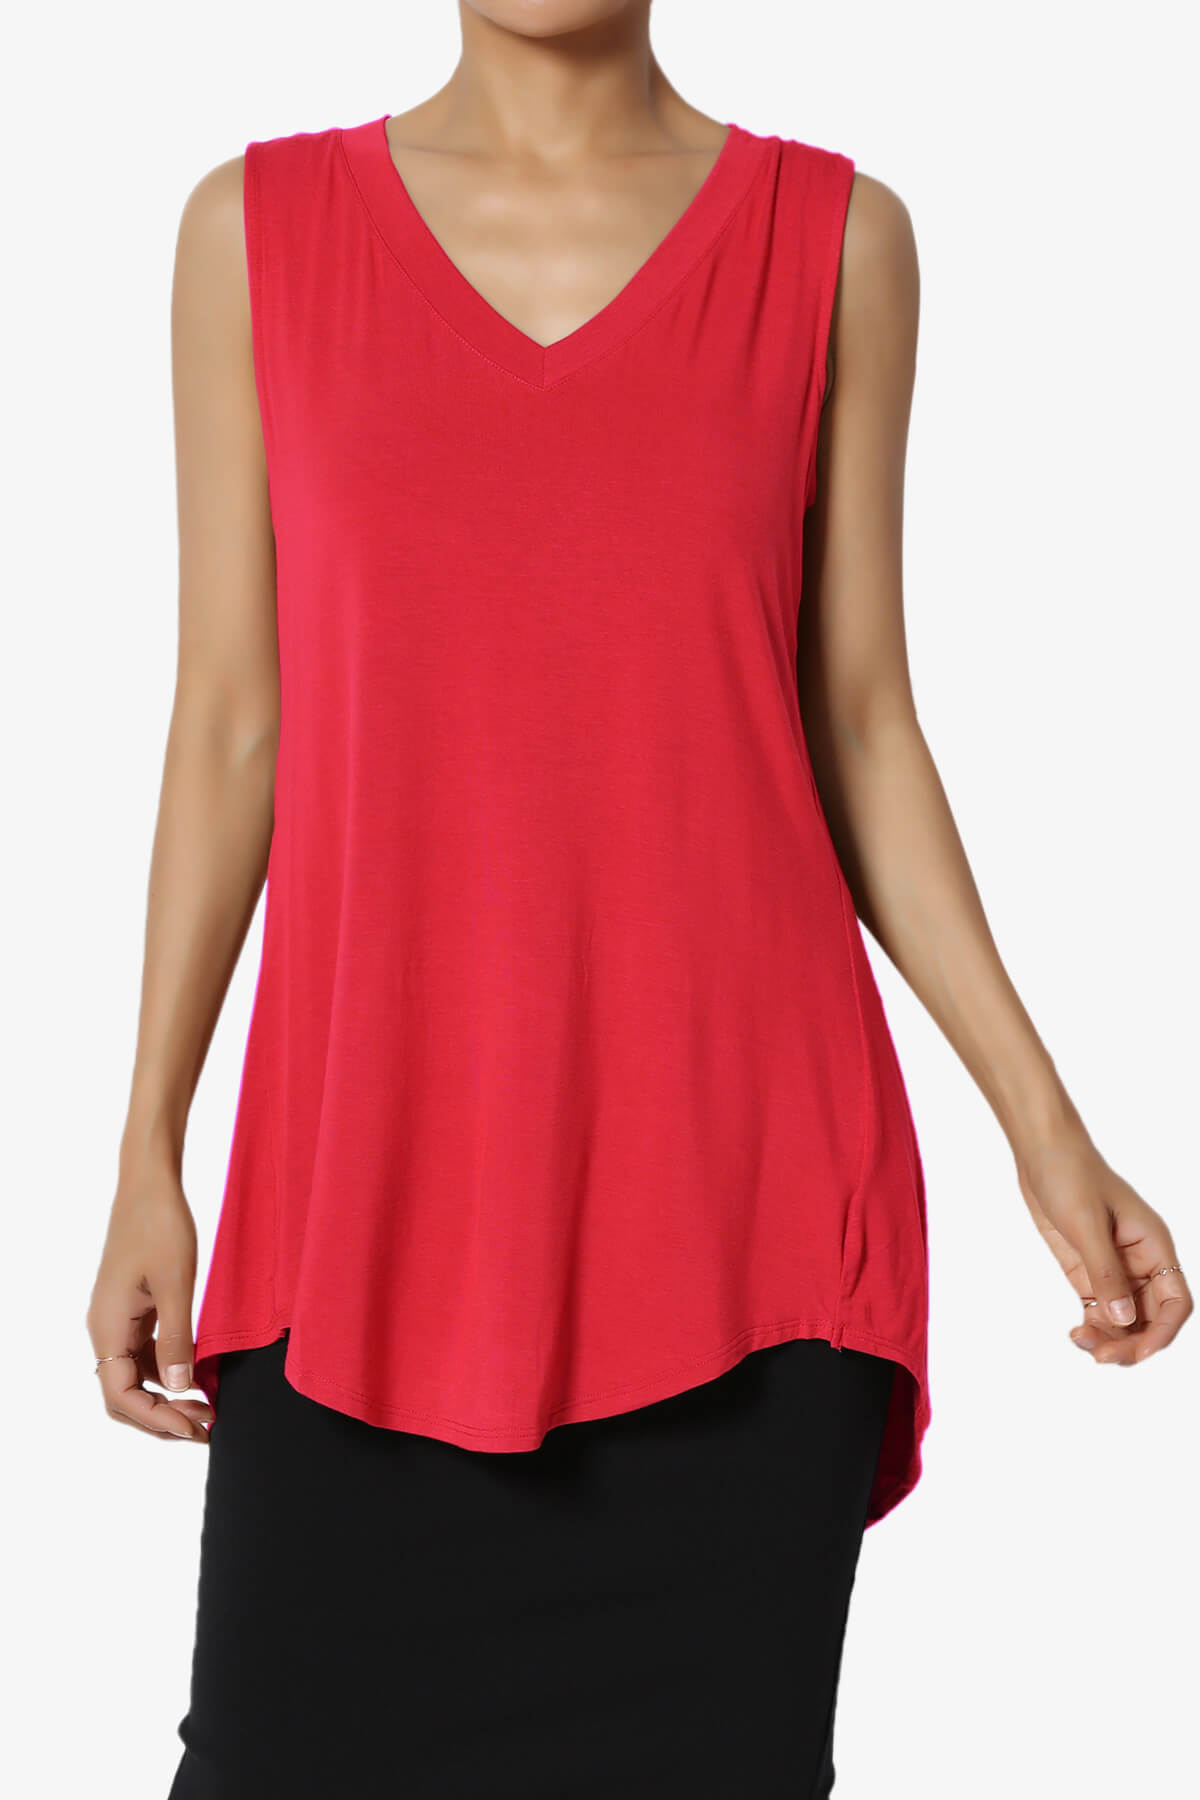 Myles Sleeveless V-Neck Luxe Jersey Top RED_1